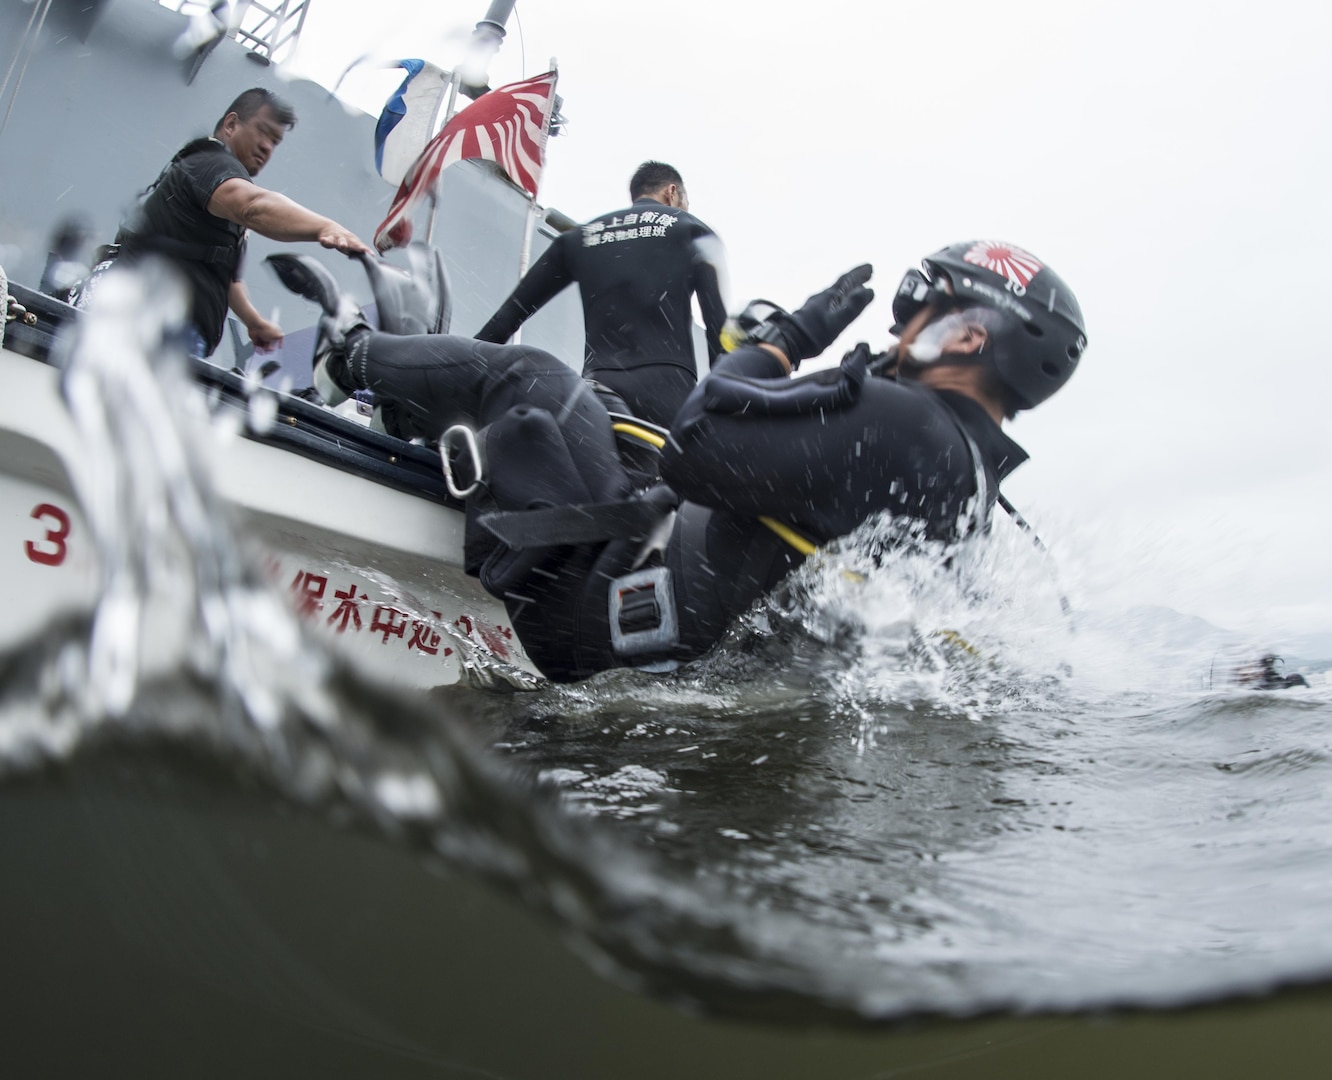 SASEBO, Japan (June 12, 2016) - A Japan Maritime Self-Defense Force (JMSDF) Explosive Ordinance Disposal technician enters the water in preparation for a dive under the guided-missile cruiser USS Mobile Bay (CG 53) at U.S. Fleet Activities Sasebo during exercise Malabar 2016, June 12.  A trilateral maritime exercise, Malabar is designed to enhance dynamic cooperation between the Indian Navy, JMSDF and U.S. Navy forces in the Indo-Asia-Pacific. 

(U.S. Navy photo by Mass Communication Specialist 1st Class Charles E. White/ Released)